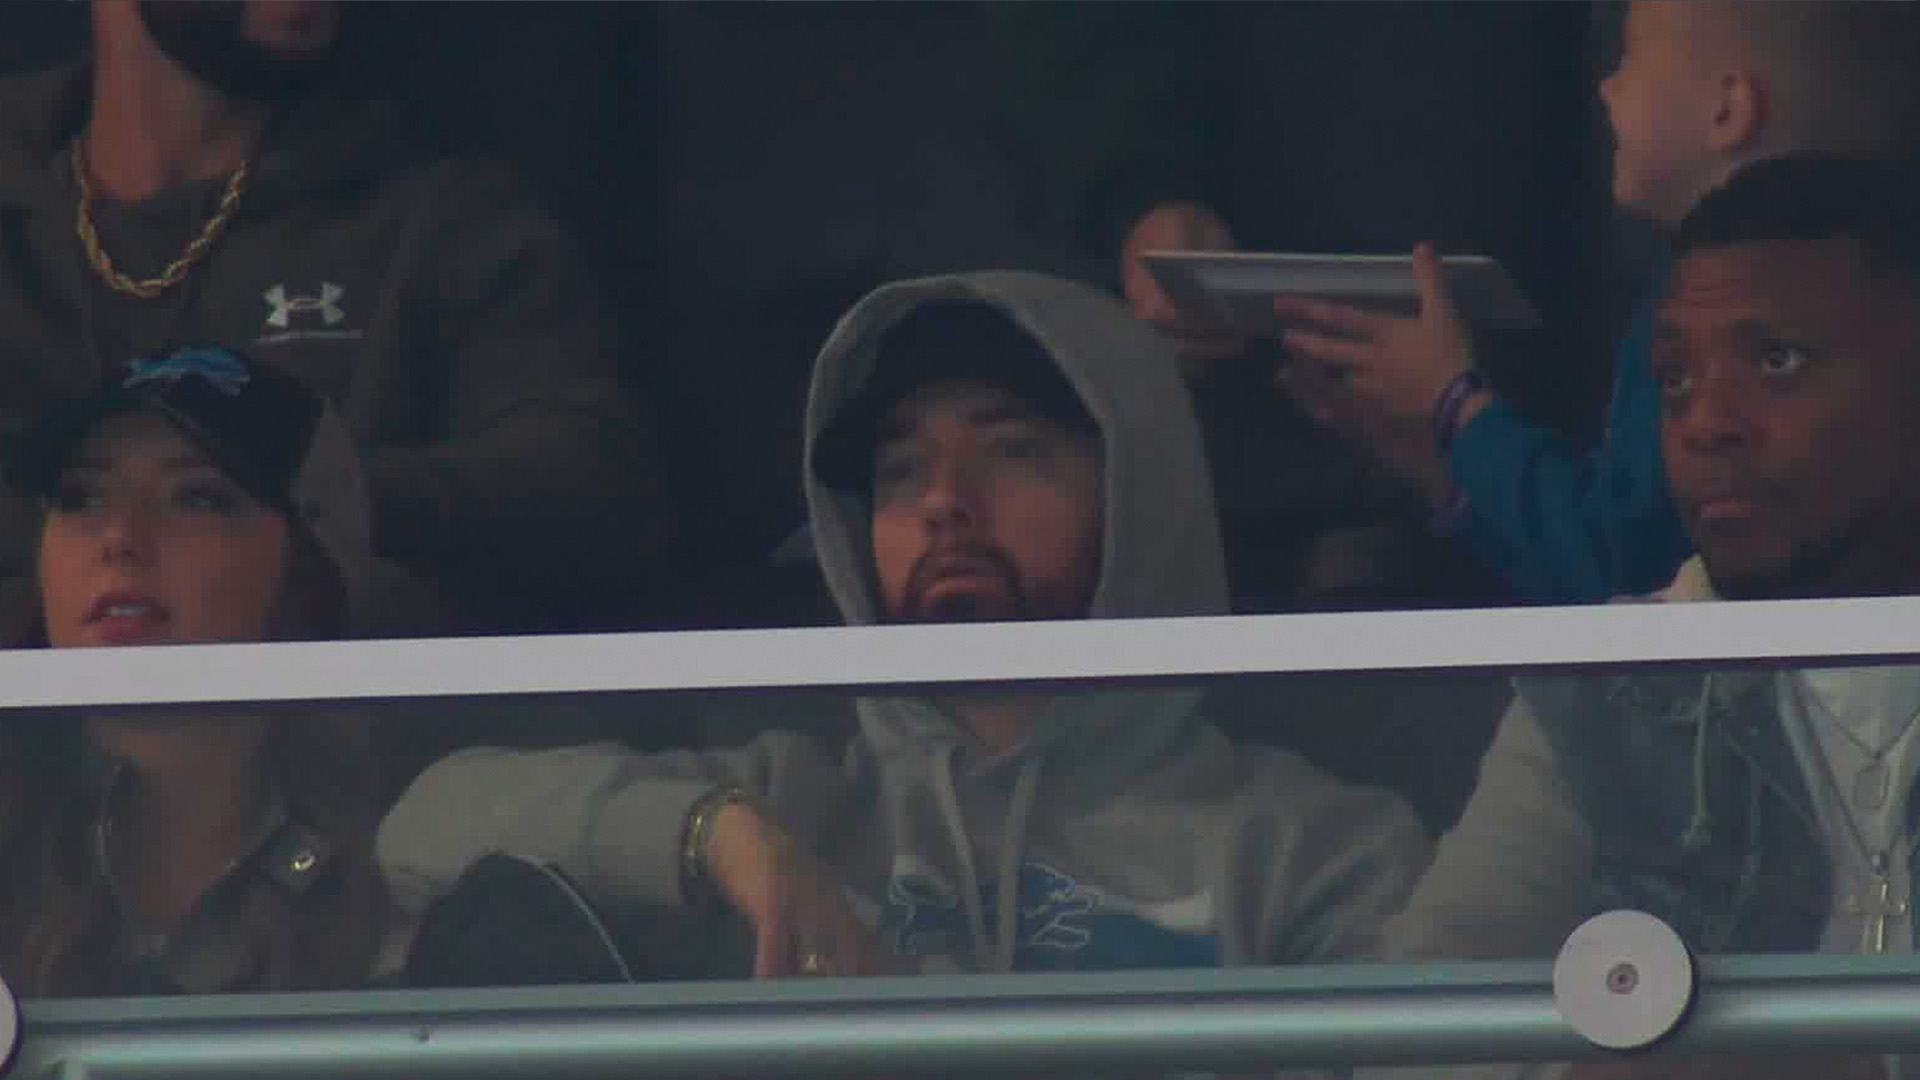 Eminem, Hailie and Mr. Porter Watching Detroit Lions vs Carolina Panthers Match Together at Ford Field Stadium